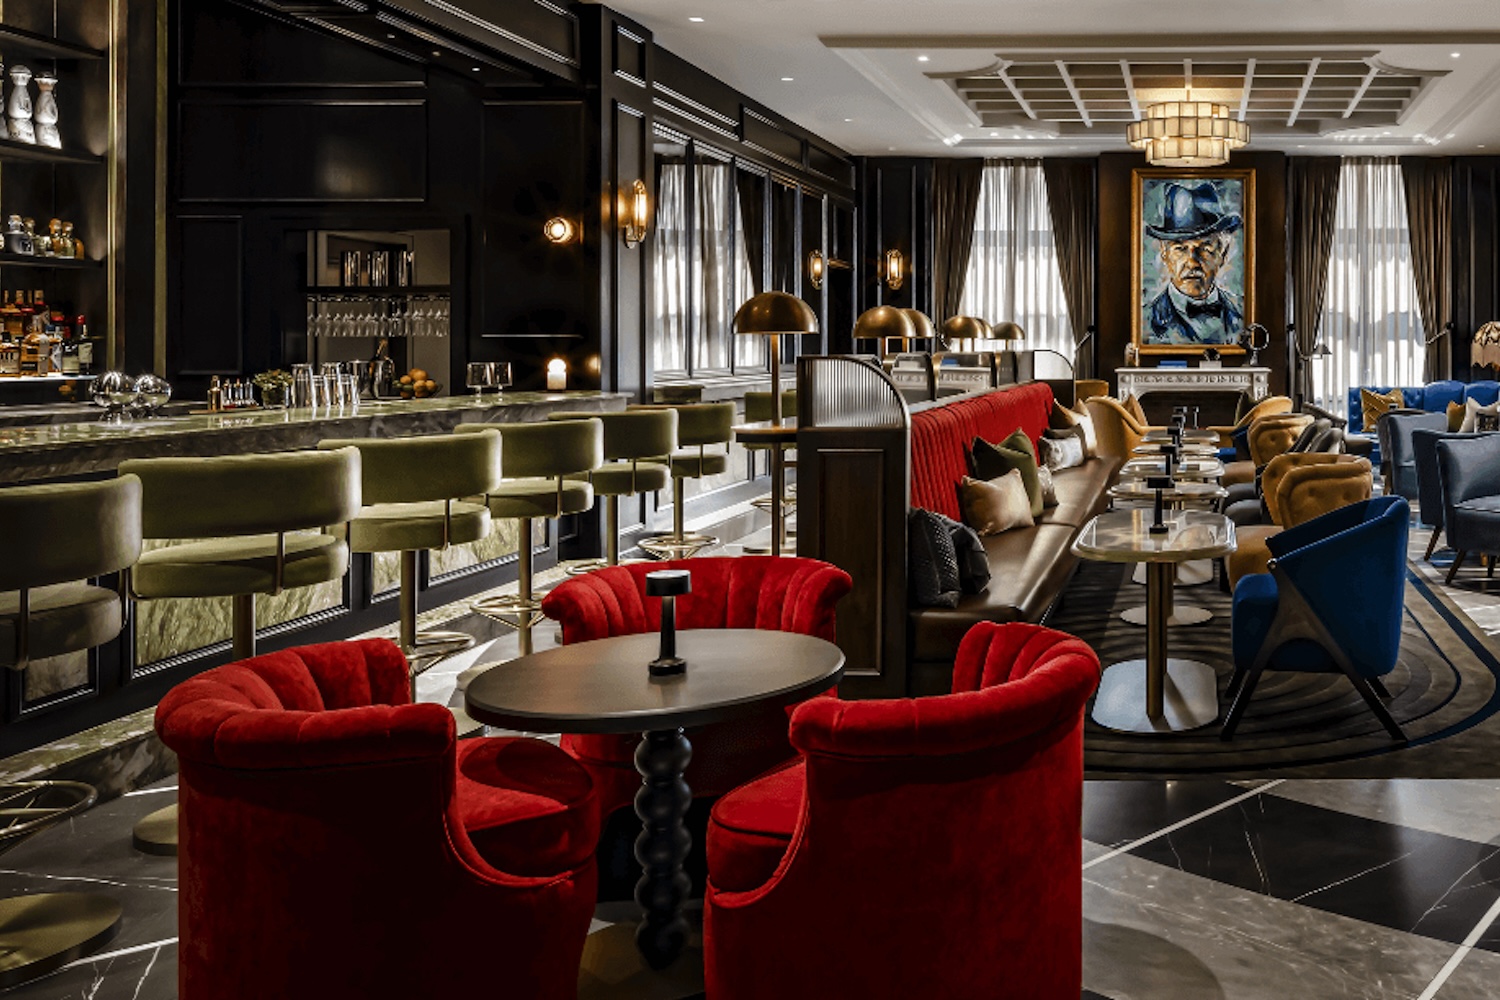 Located in the lobby of the Fairmont Royal York Hotel, Library Bar has an air of good-natured sophistication.